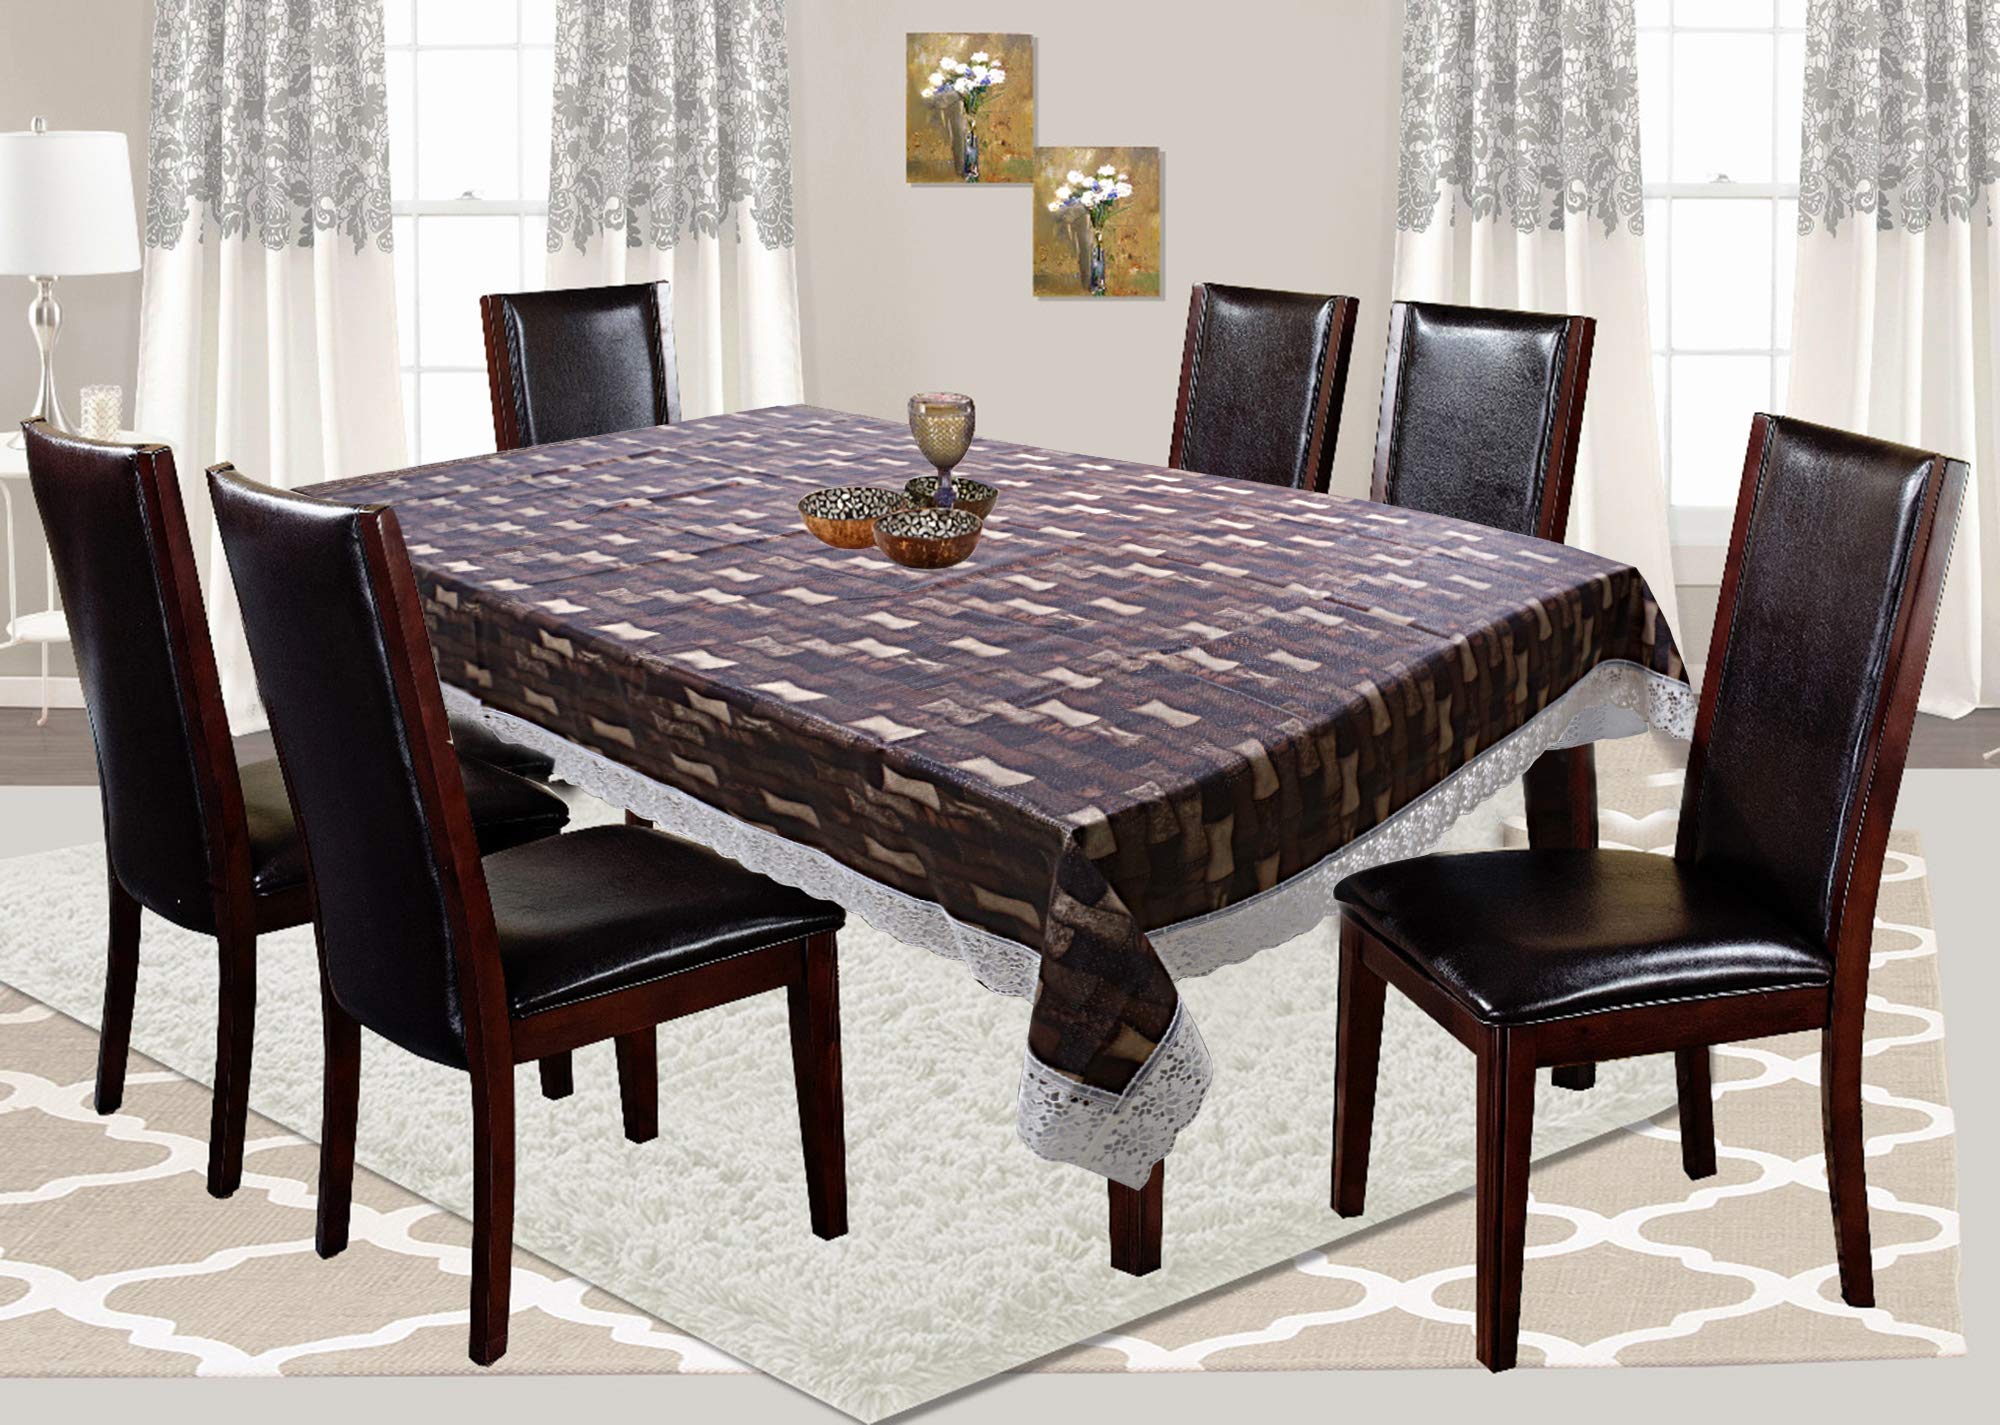 Kuber Industries Bamboo Design 6 Seater Dining Table Cover 60"x90" (Brown),Polyvinyl Chloride (PVC),Rectangular,Pack of 1